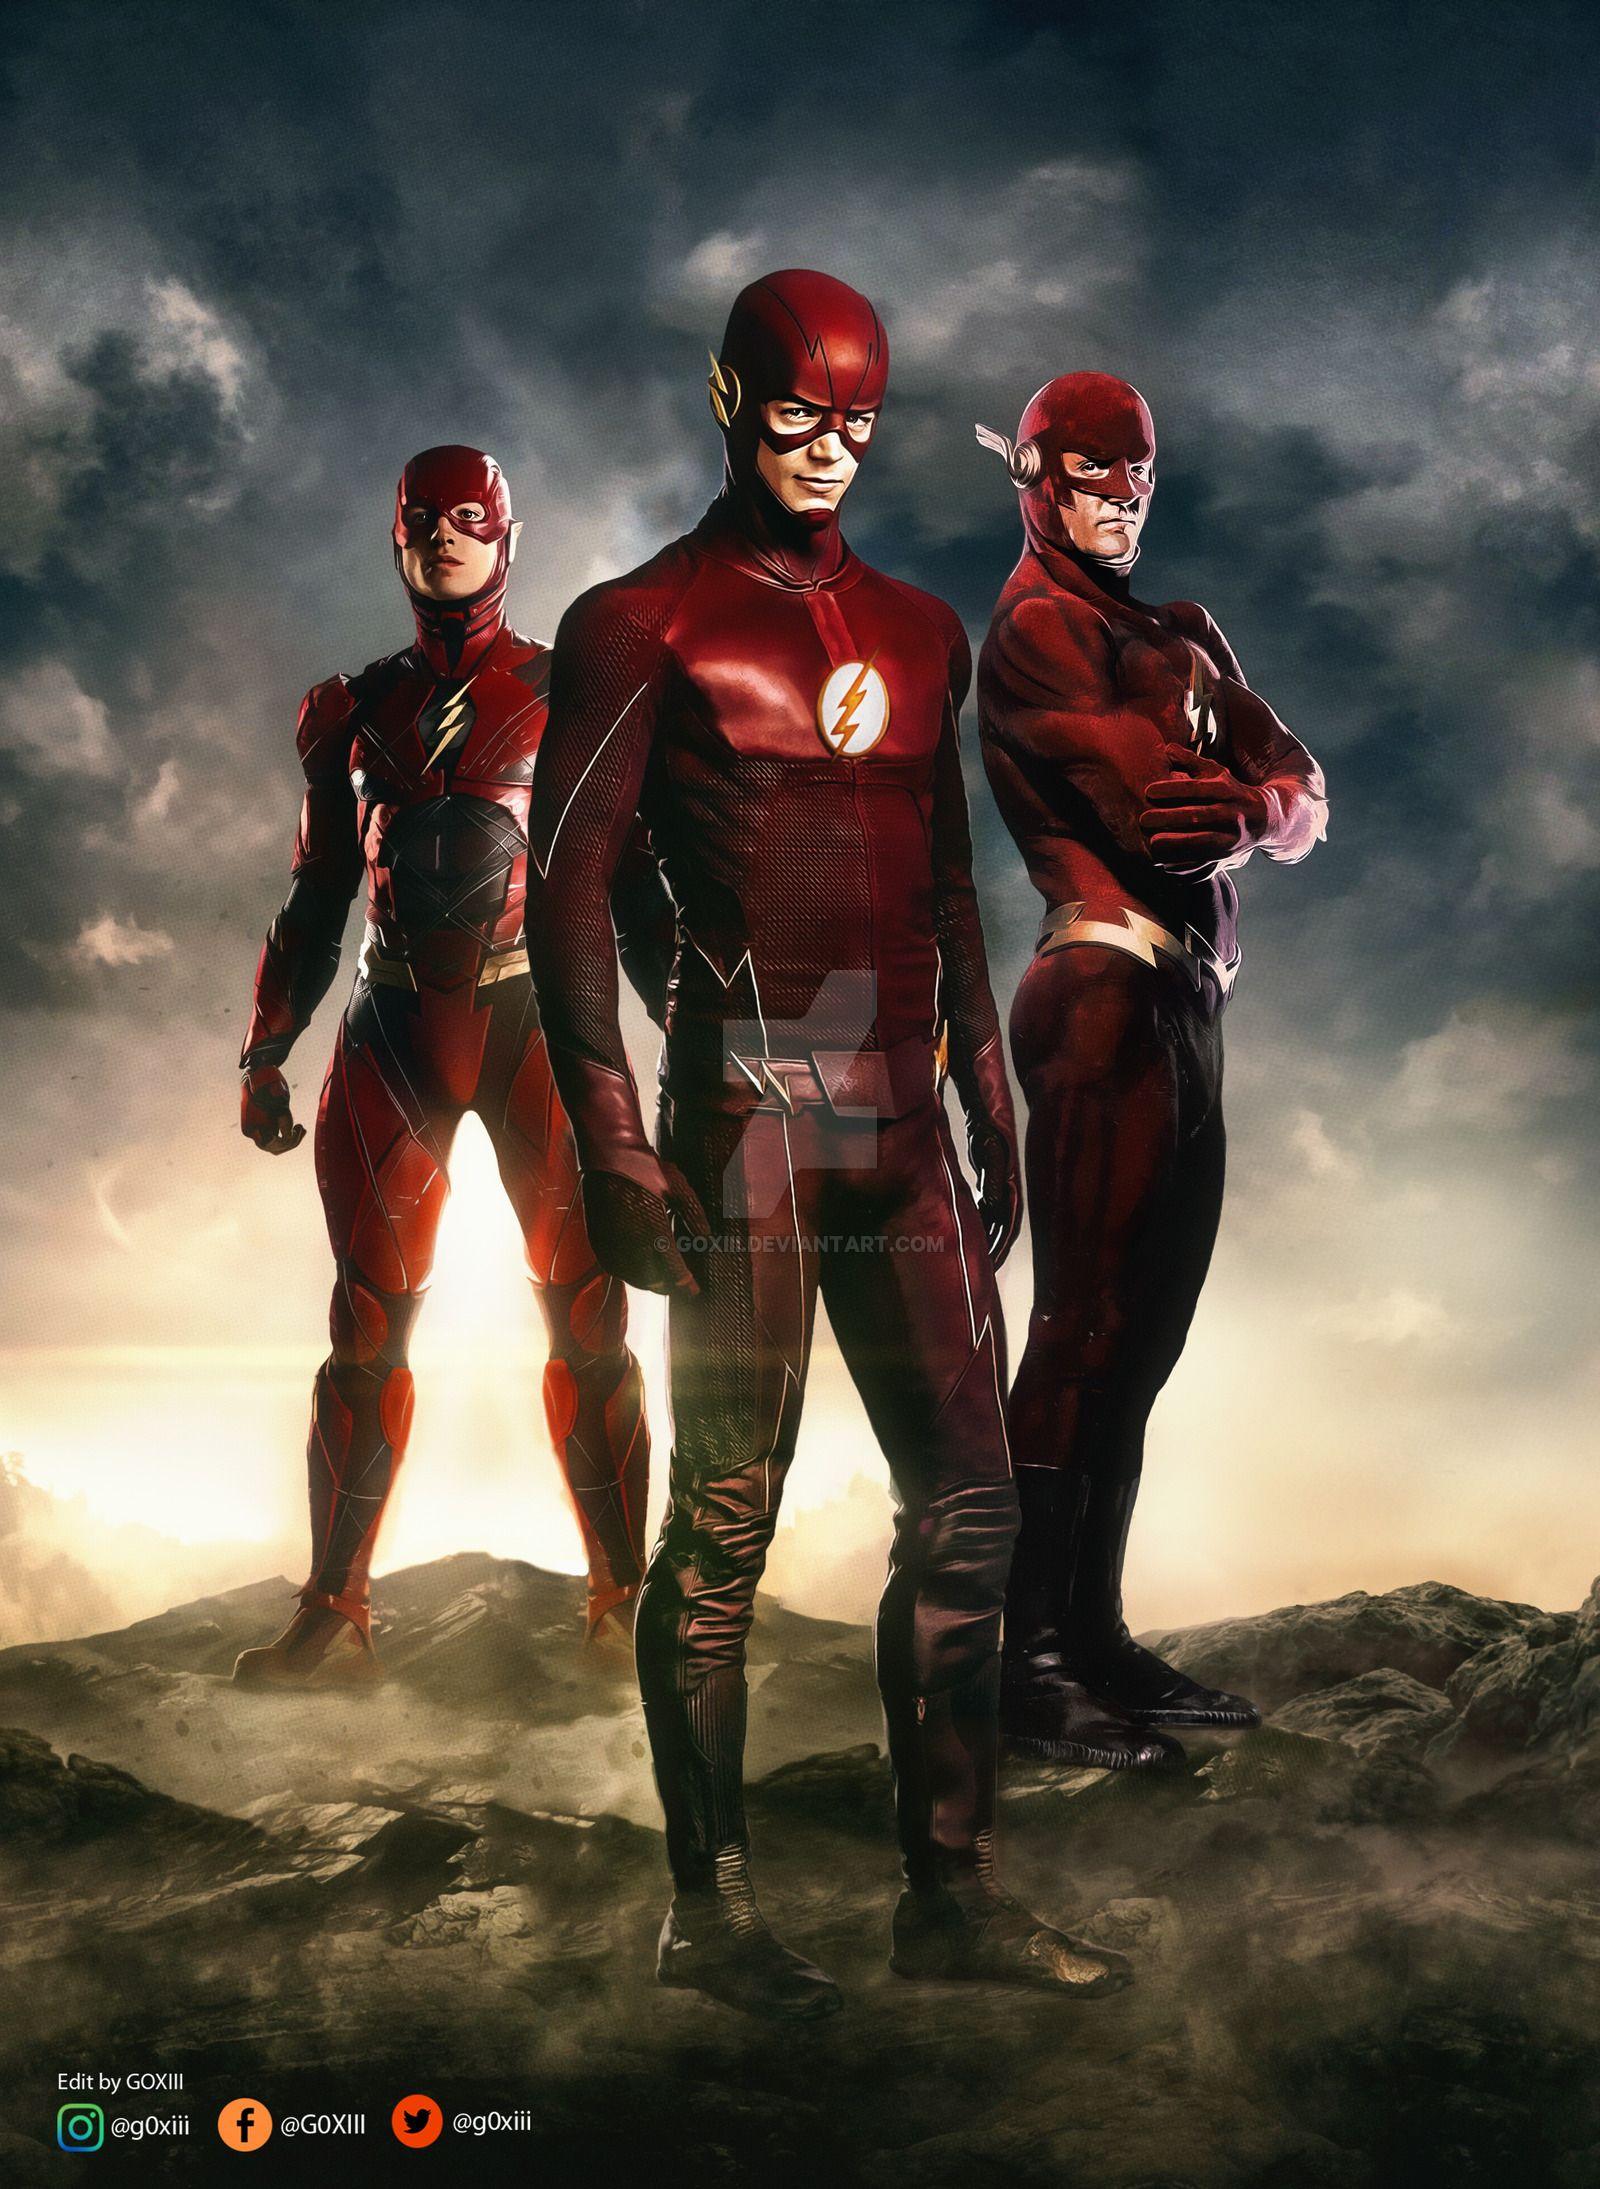 The Flash 2017 Wallpaper Free The Flash 2017 Background